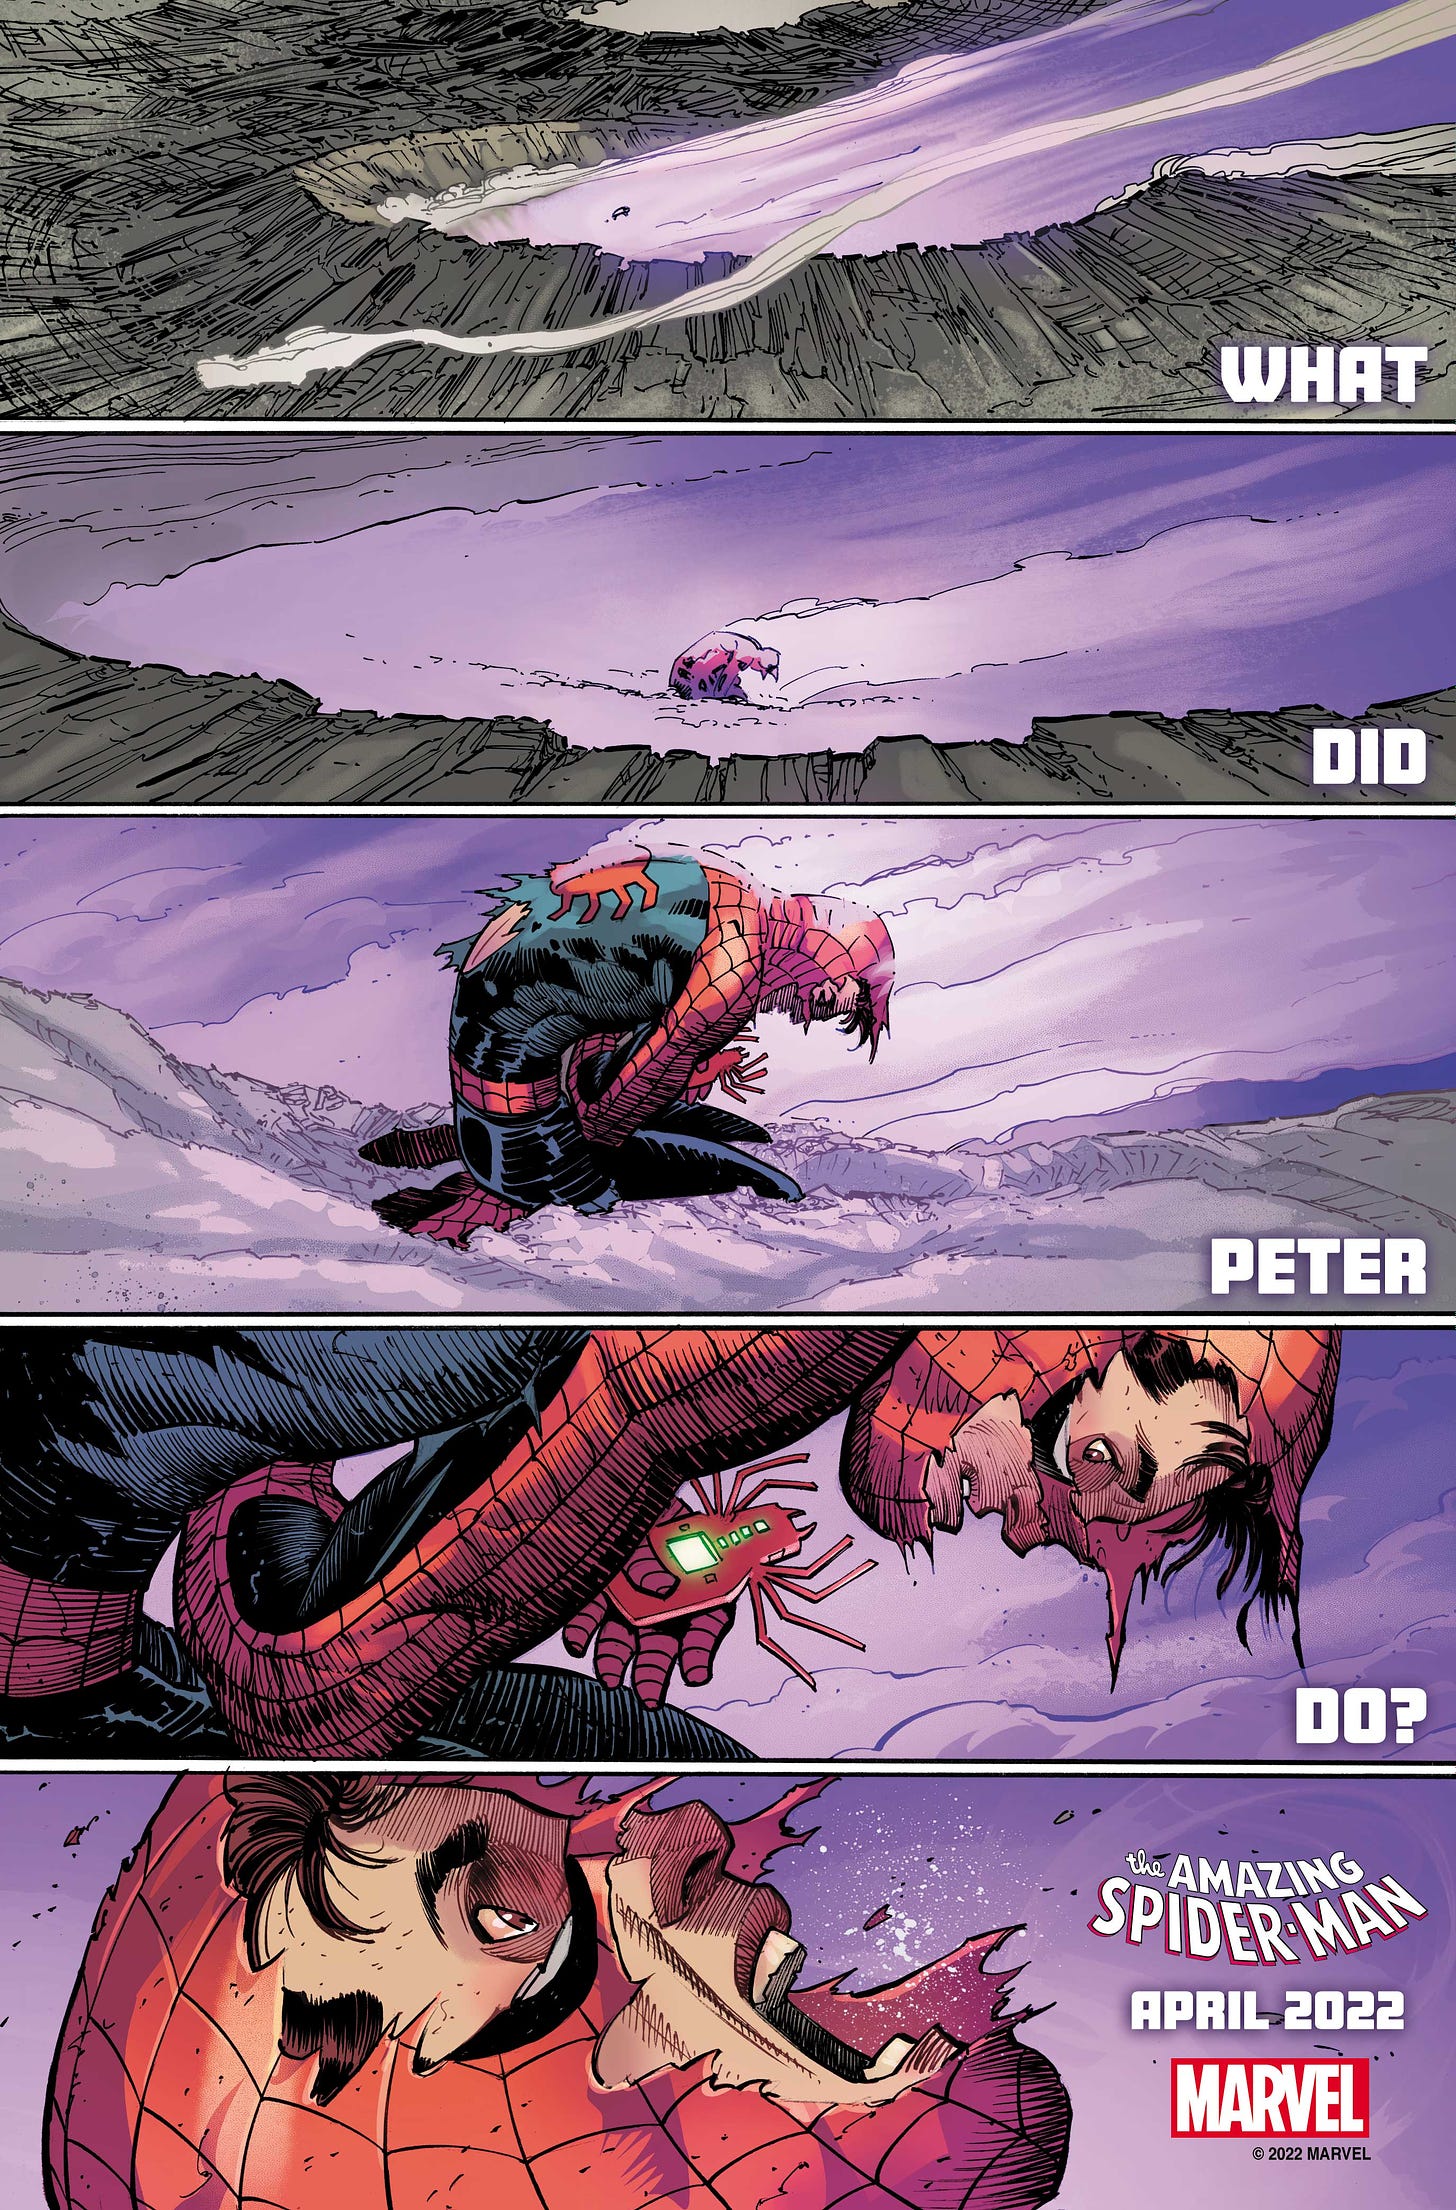 Marvel's Amazing Spider-Man Relaunch Asks 'What Did Peter Do?' - IGN